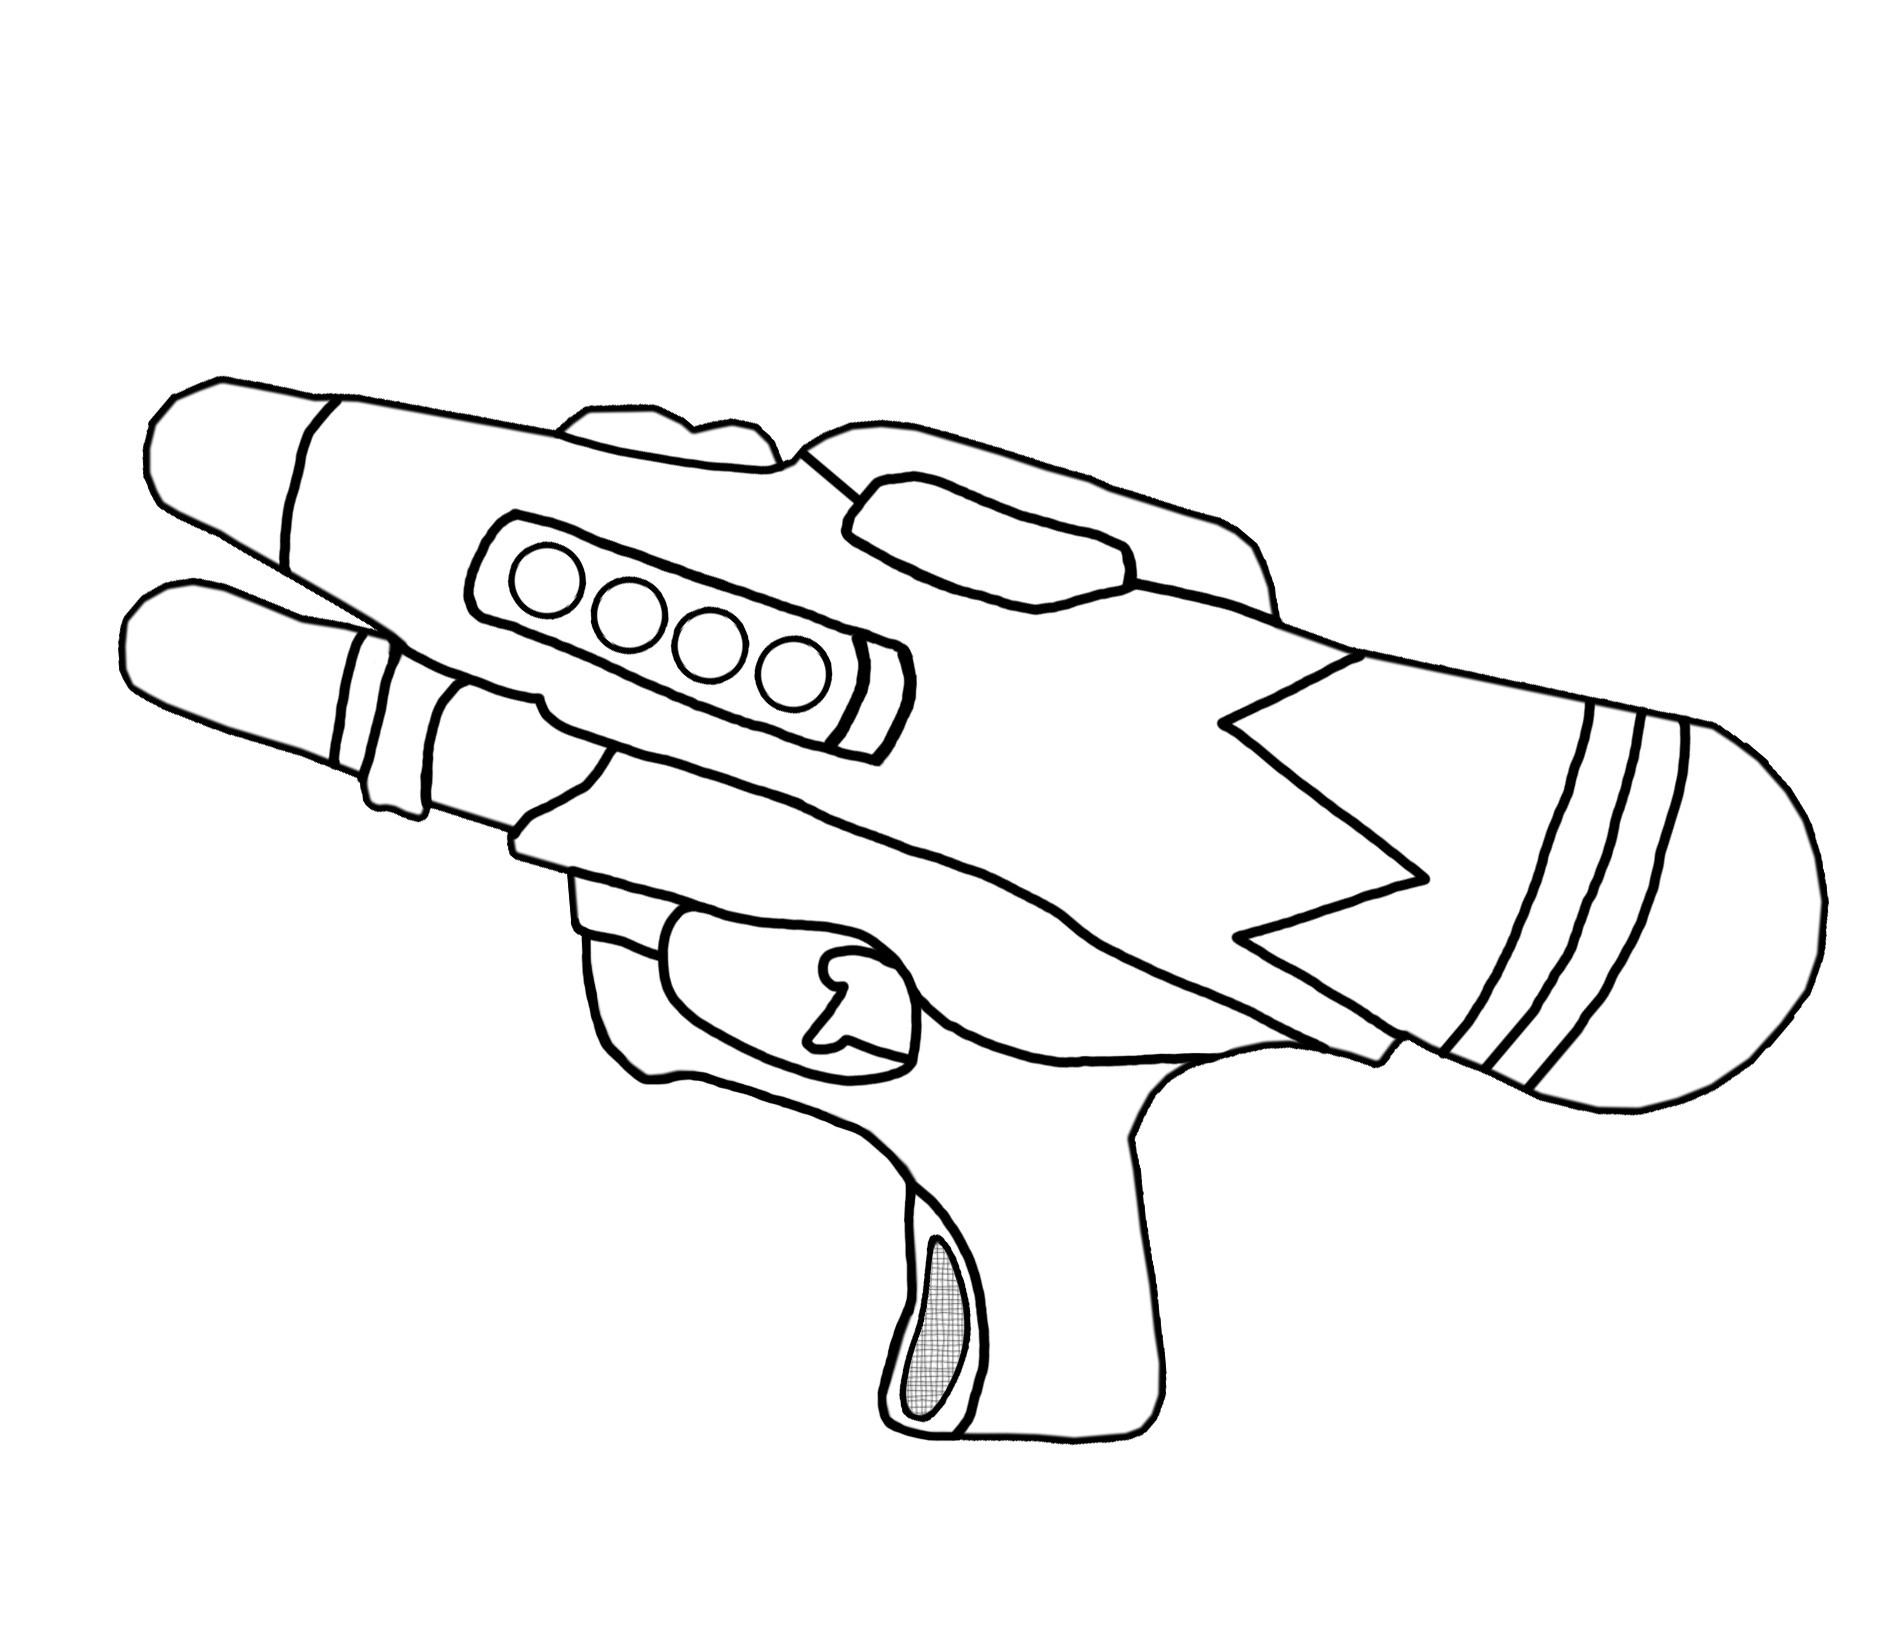 Gun Coloring Pages Coloring Pages For Kids Nerf Guns With Gun Coloring Pictures 2343900